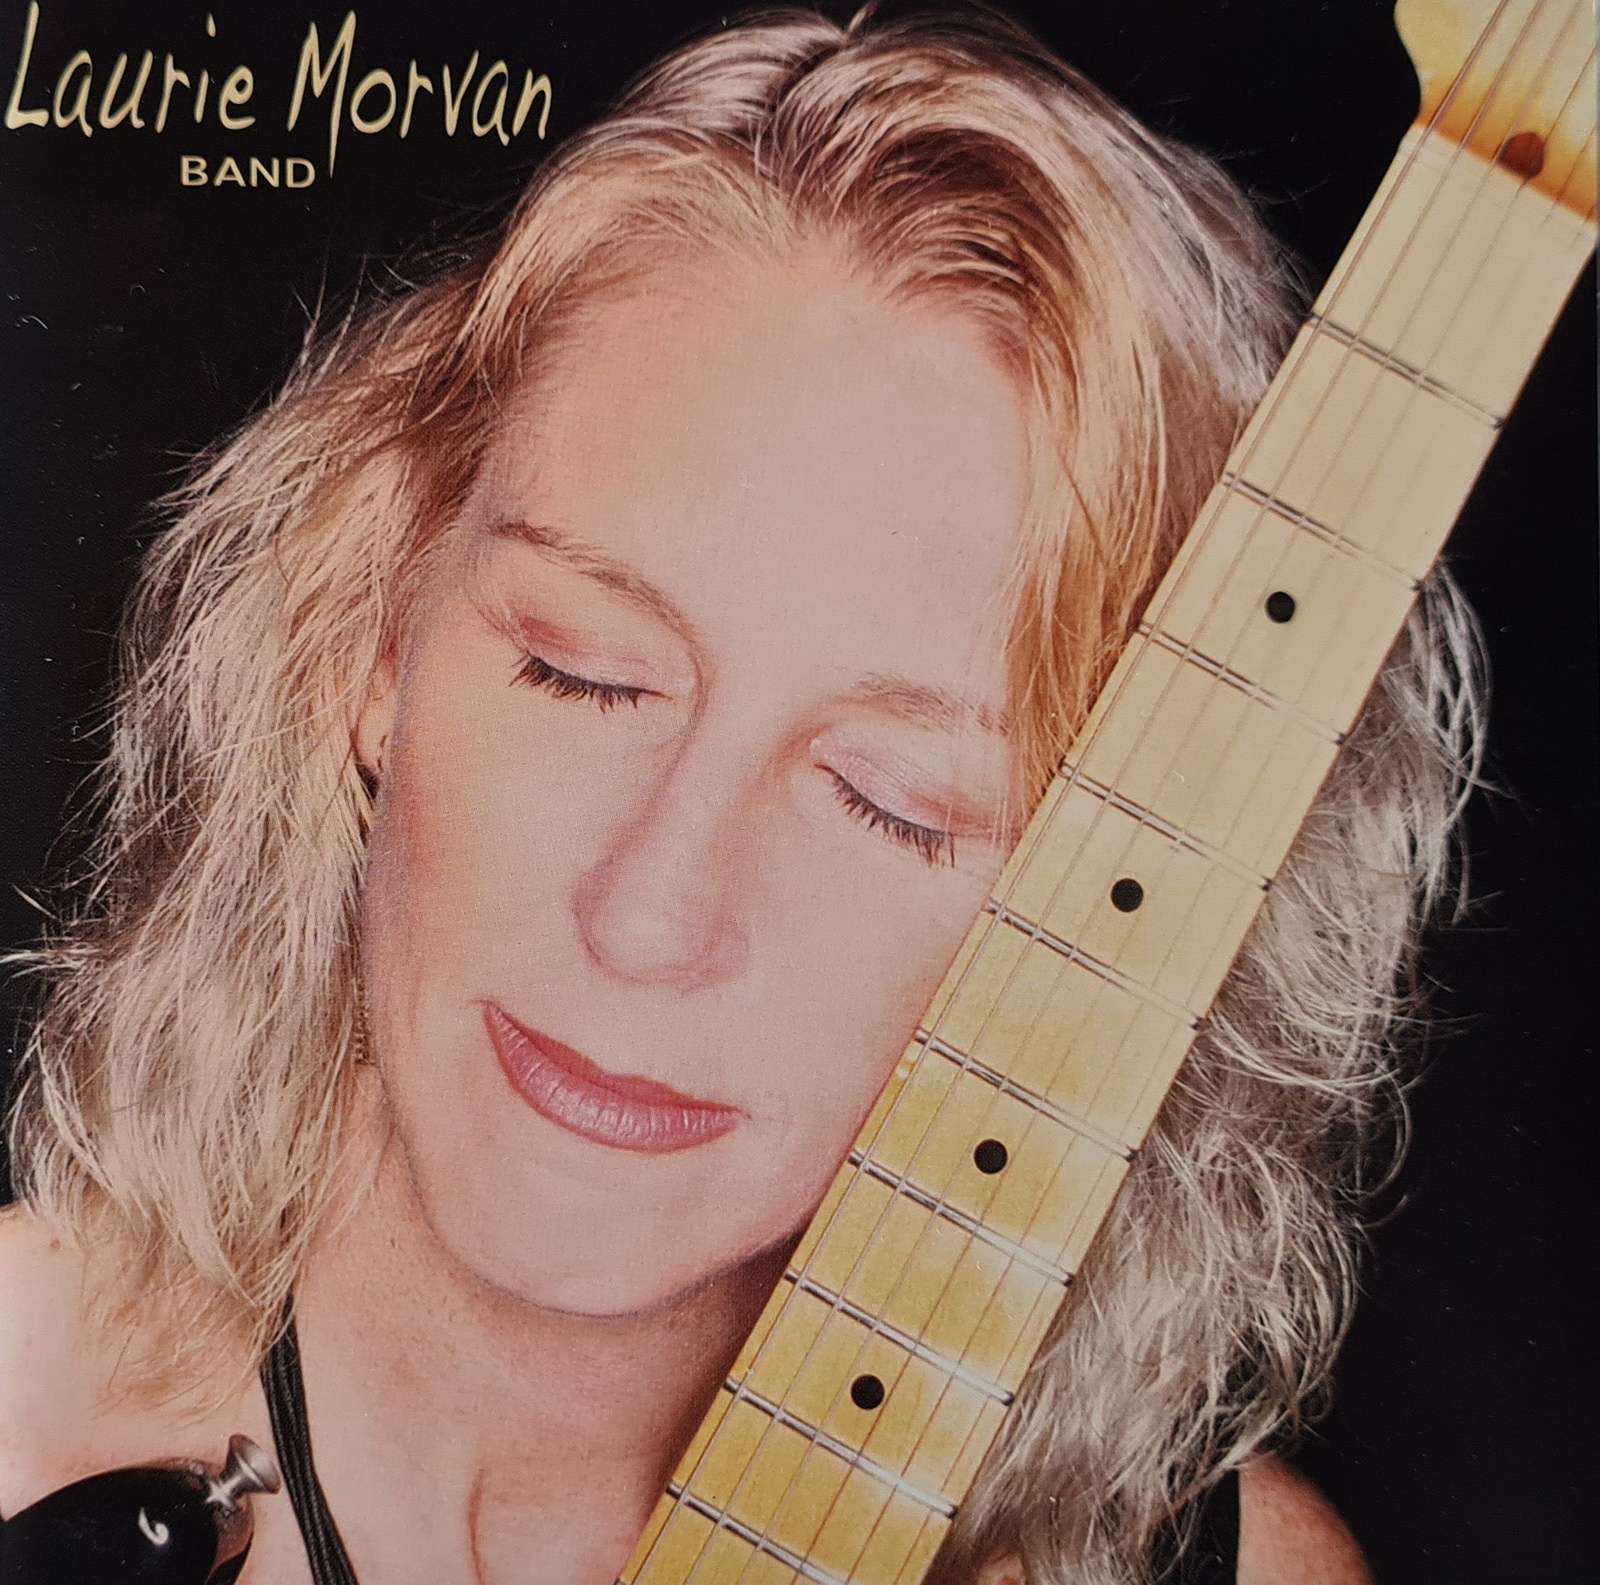 Laurie Morvan Band - Cures What Ails Ya (CD)